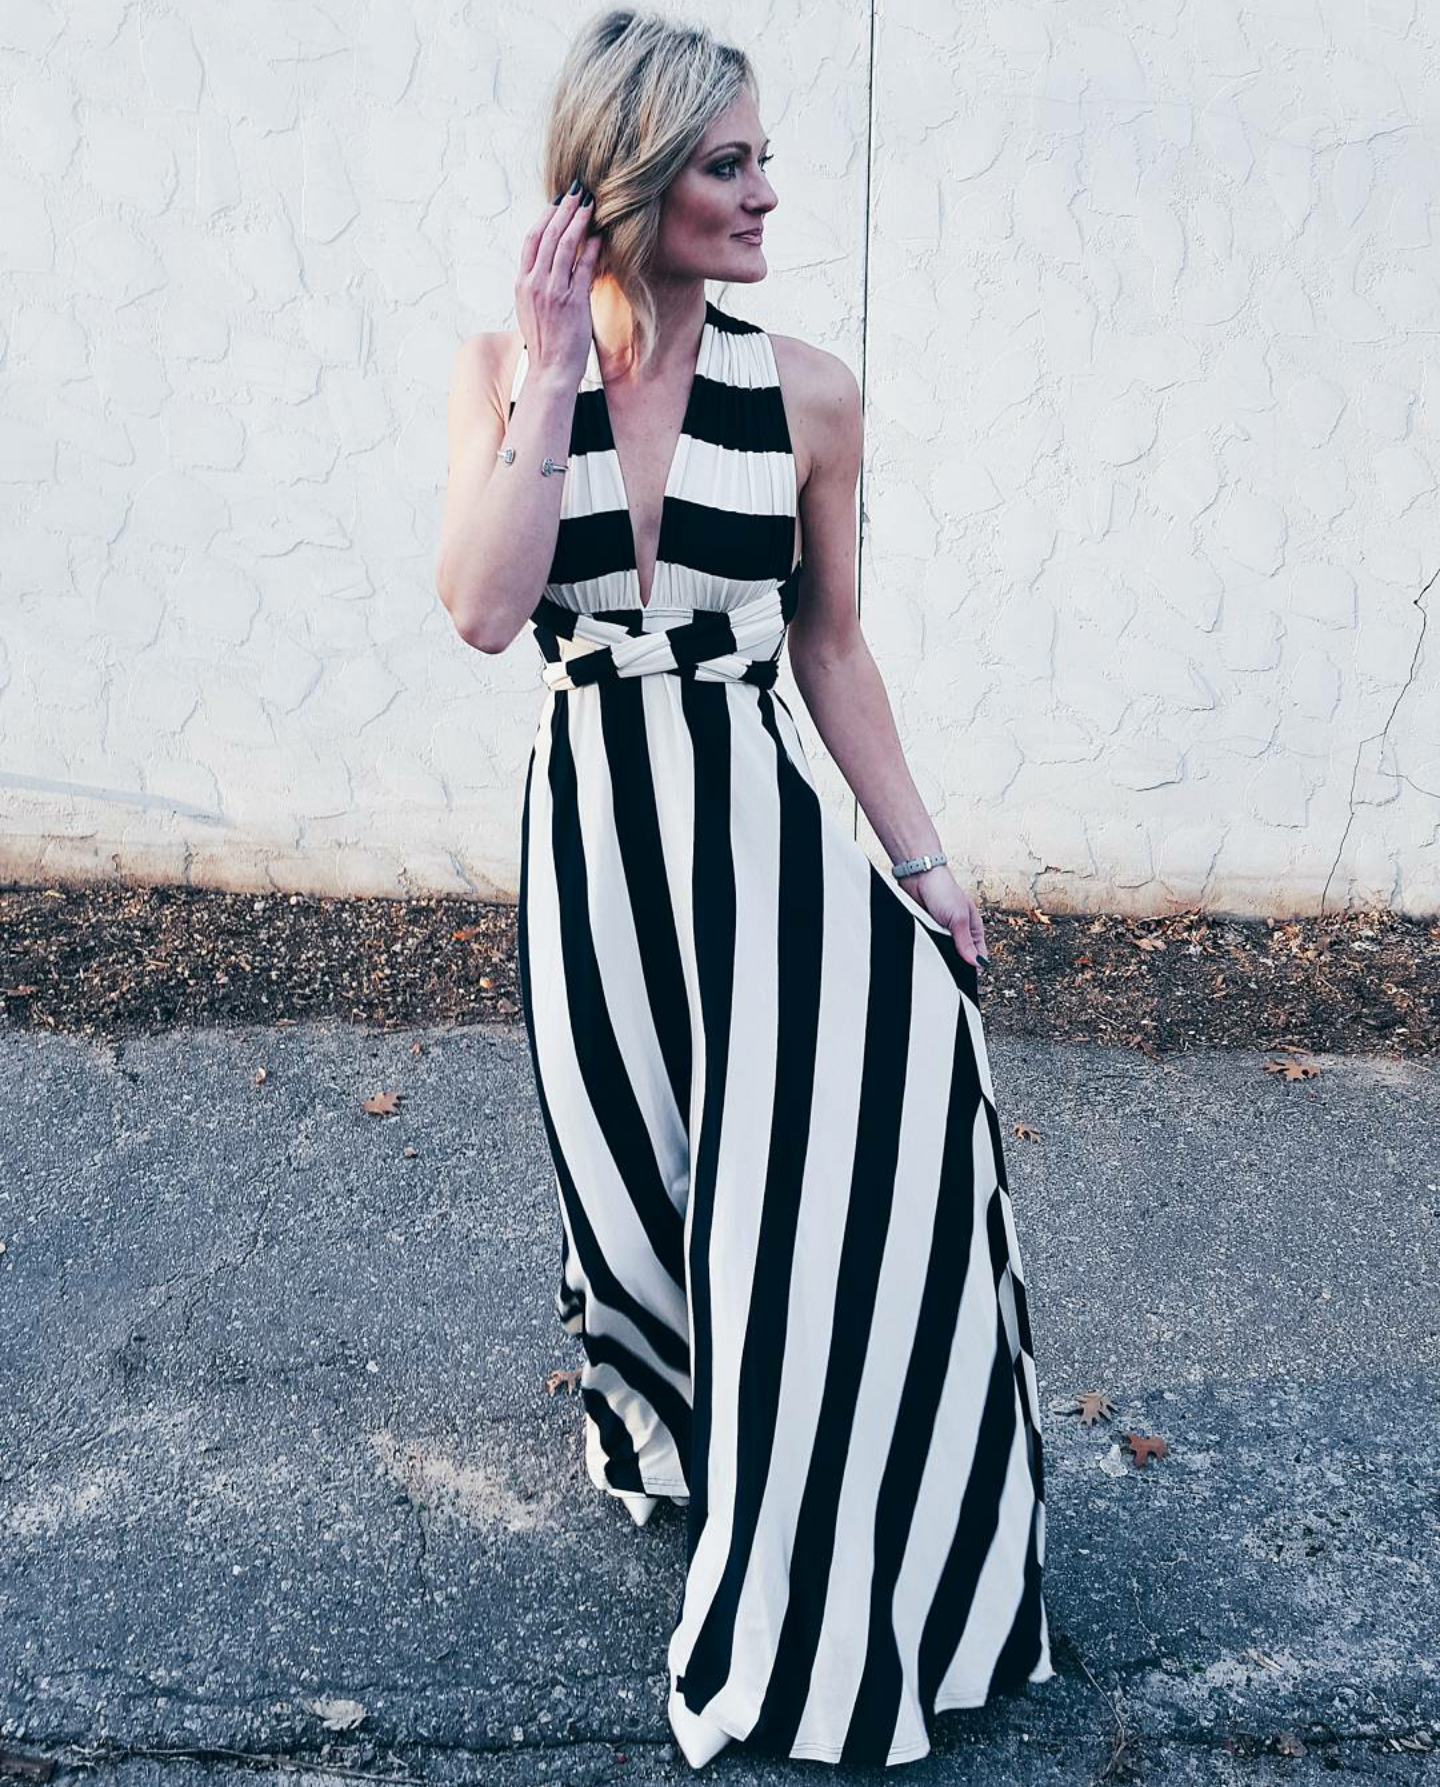 Twirling in Stripes for Spring’s Arrival - CHAMPAGNE + MACAROONS